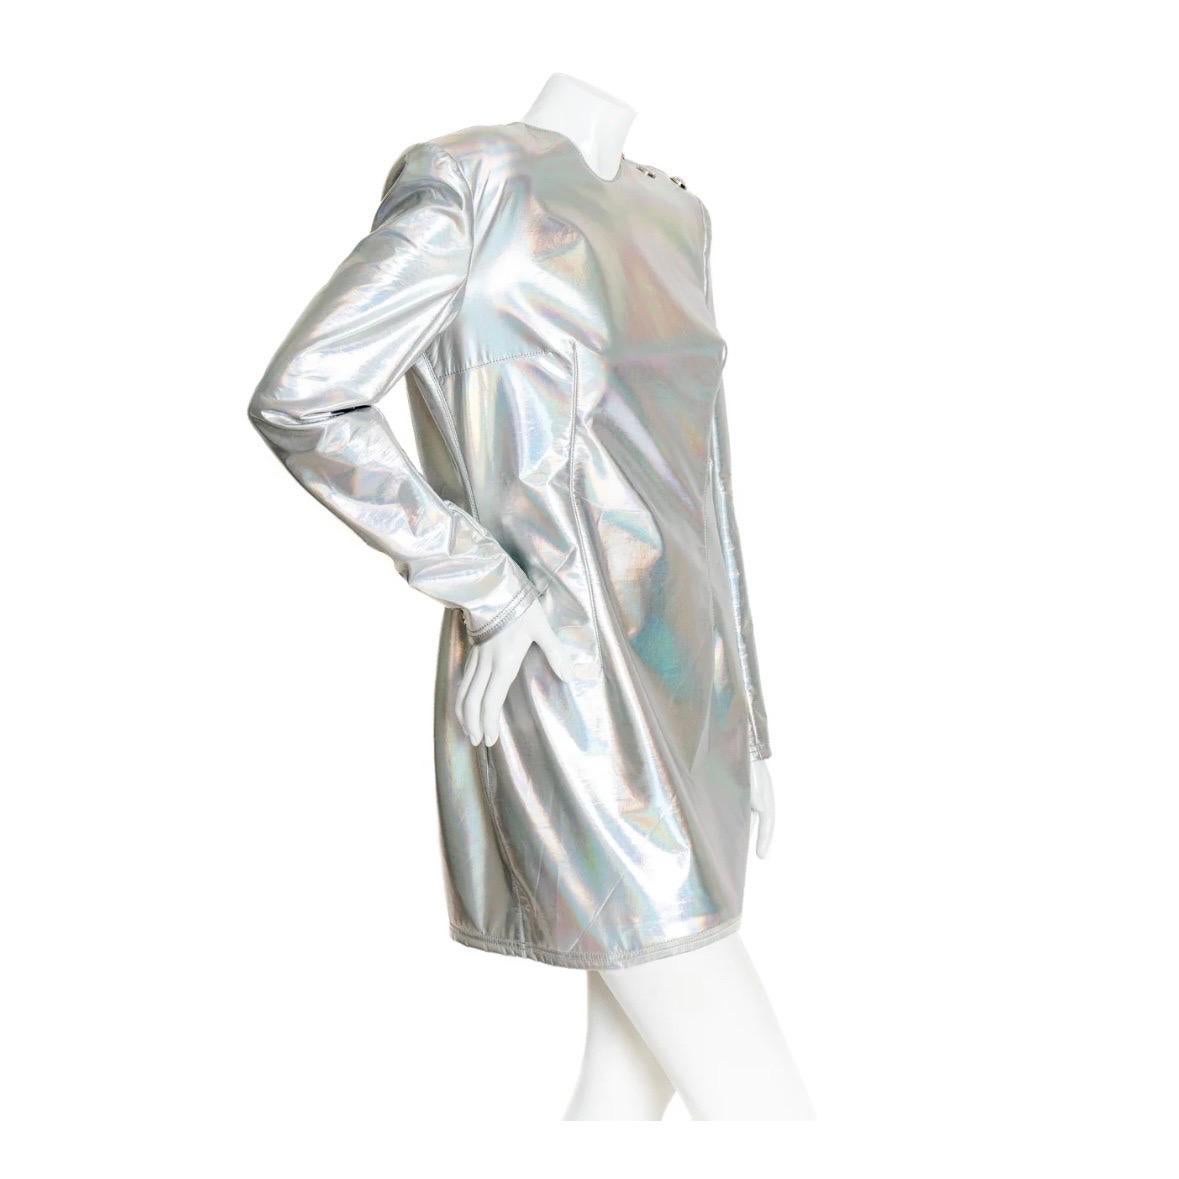 Holographic silver mini dress by Balmain
Silver Iridescent coated
Long sleeve
Round neckline
Silver buttons on shoulder
Exposed back zipper
Shoulder pads 
Darted bust
Cuff buttons
Stretch knit
Fully lined
Short, mini length
Stretchy bodycon